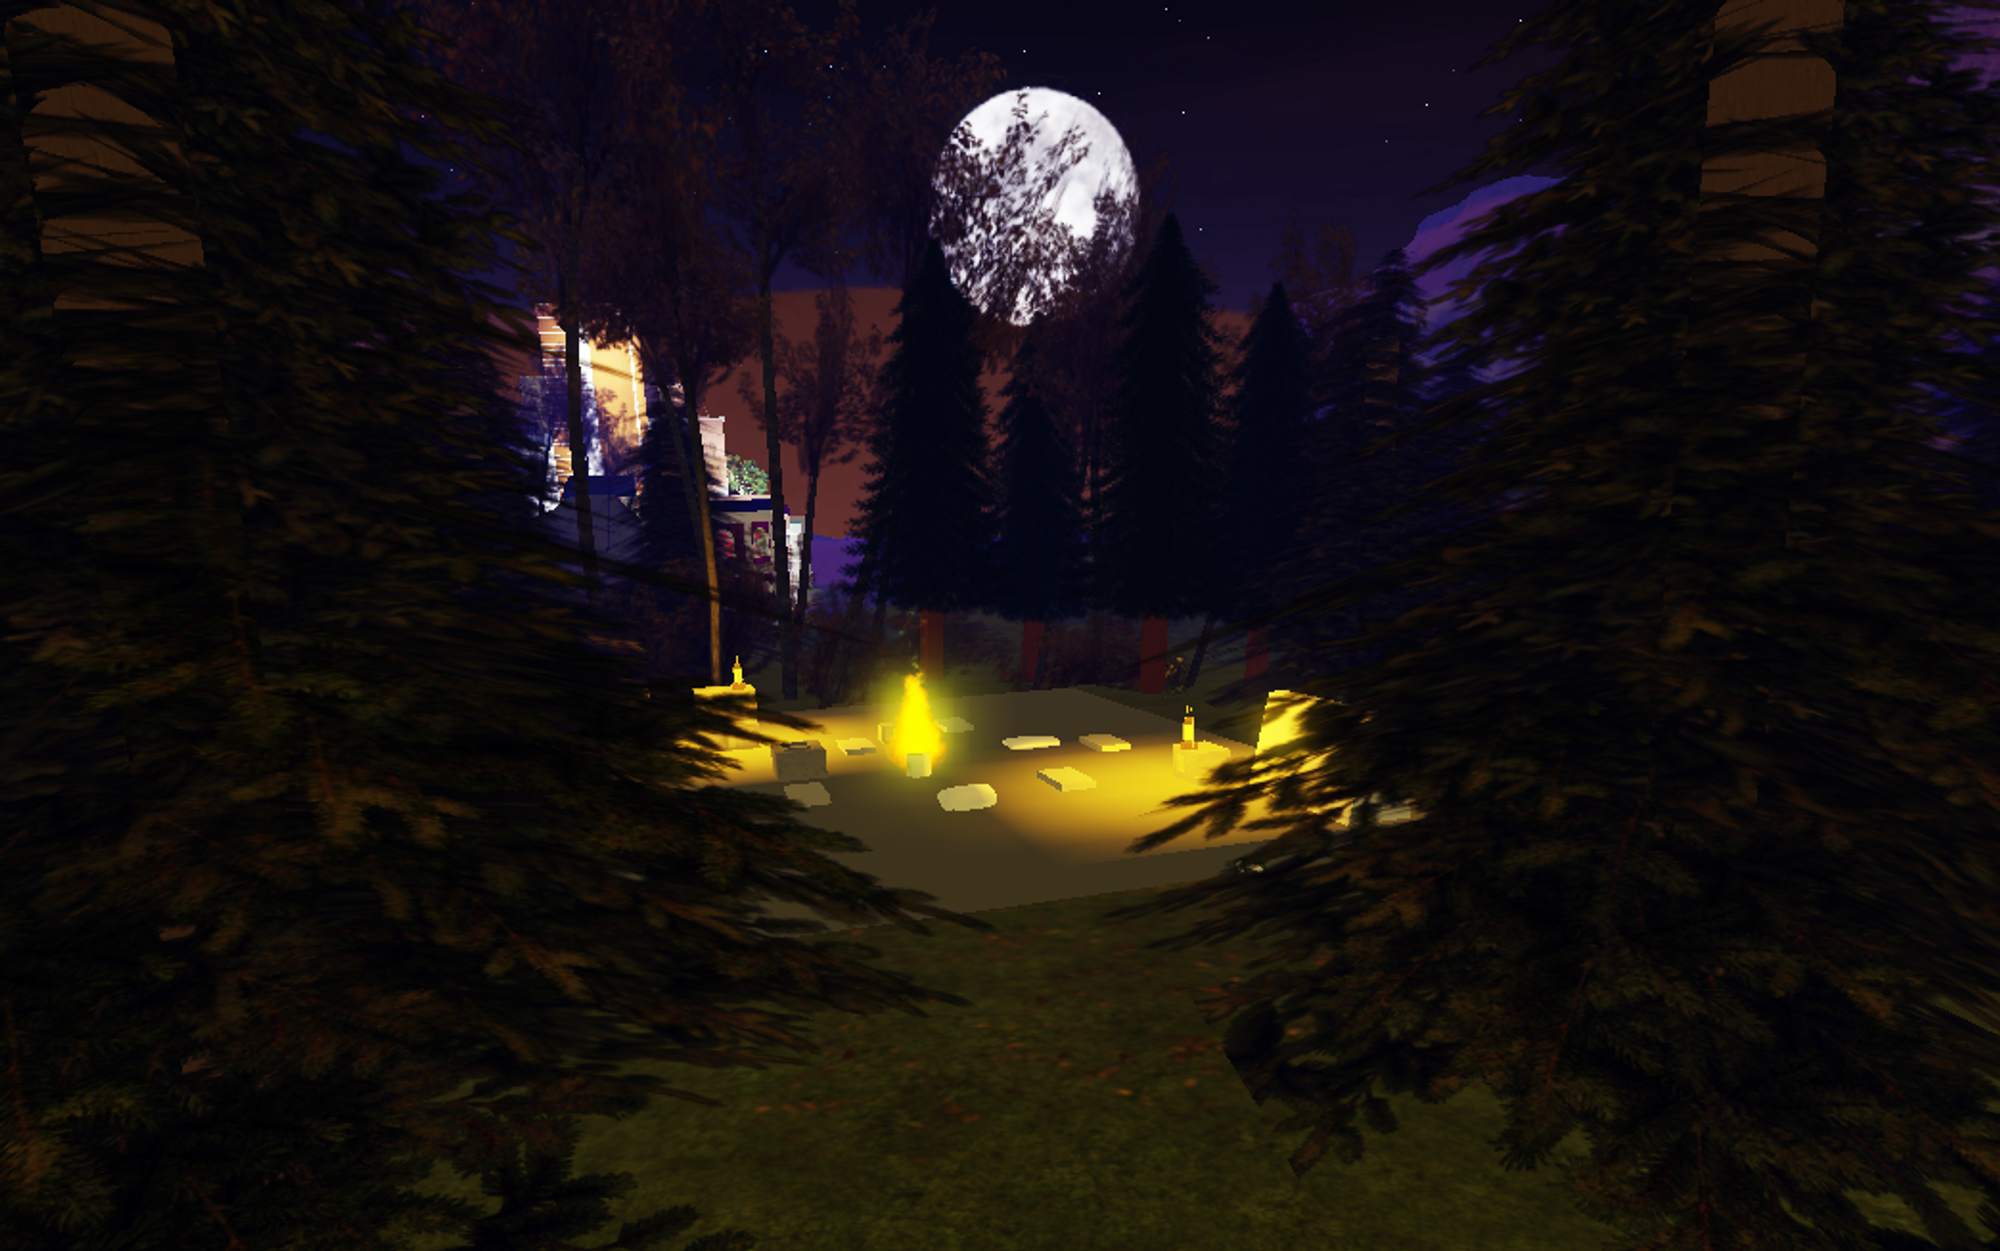 A screenshot of the author's birthday cement slab in Roblox, with a big white moon rising over a glowing campfire.